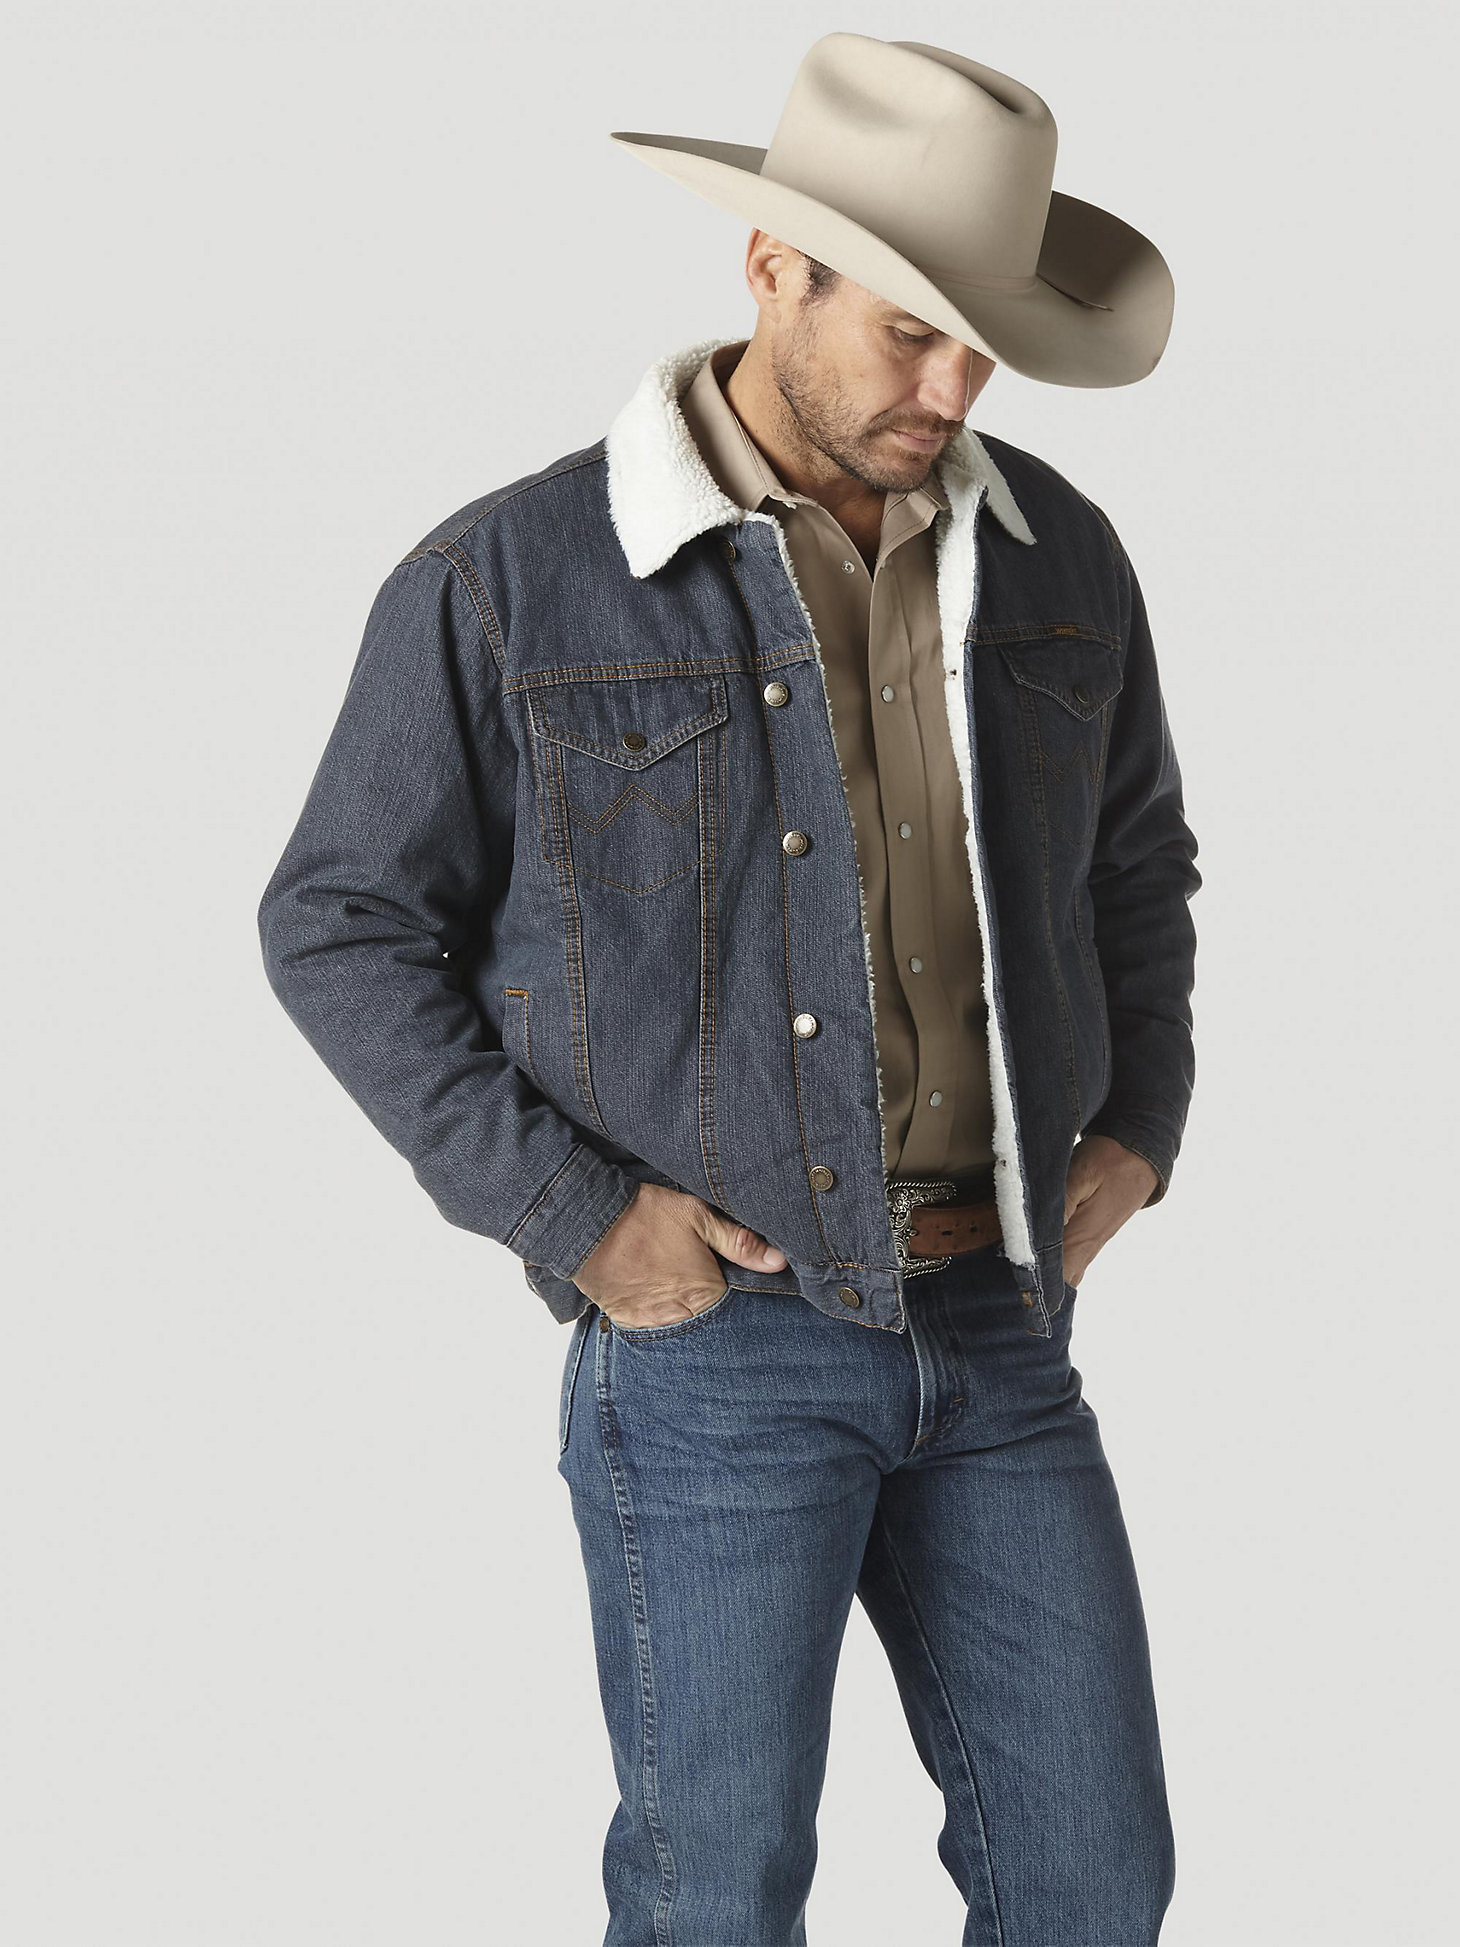 Wrangler® Western Styled Sherpa Lined Denim Jacket in Rustic main view